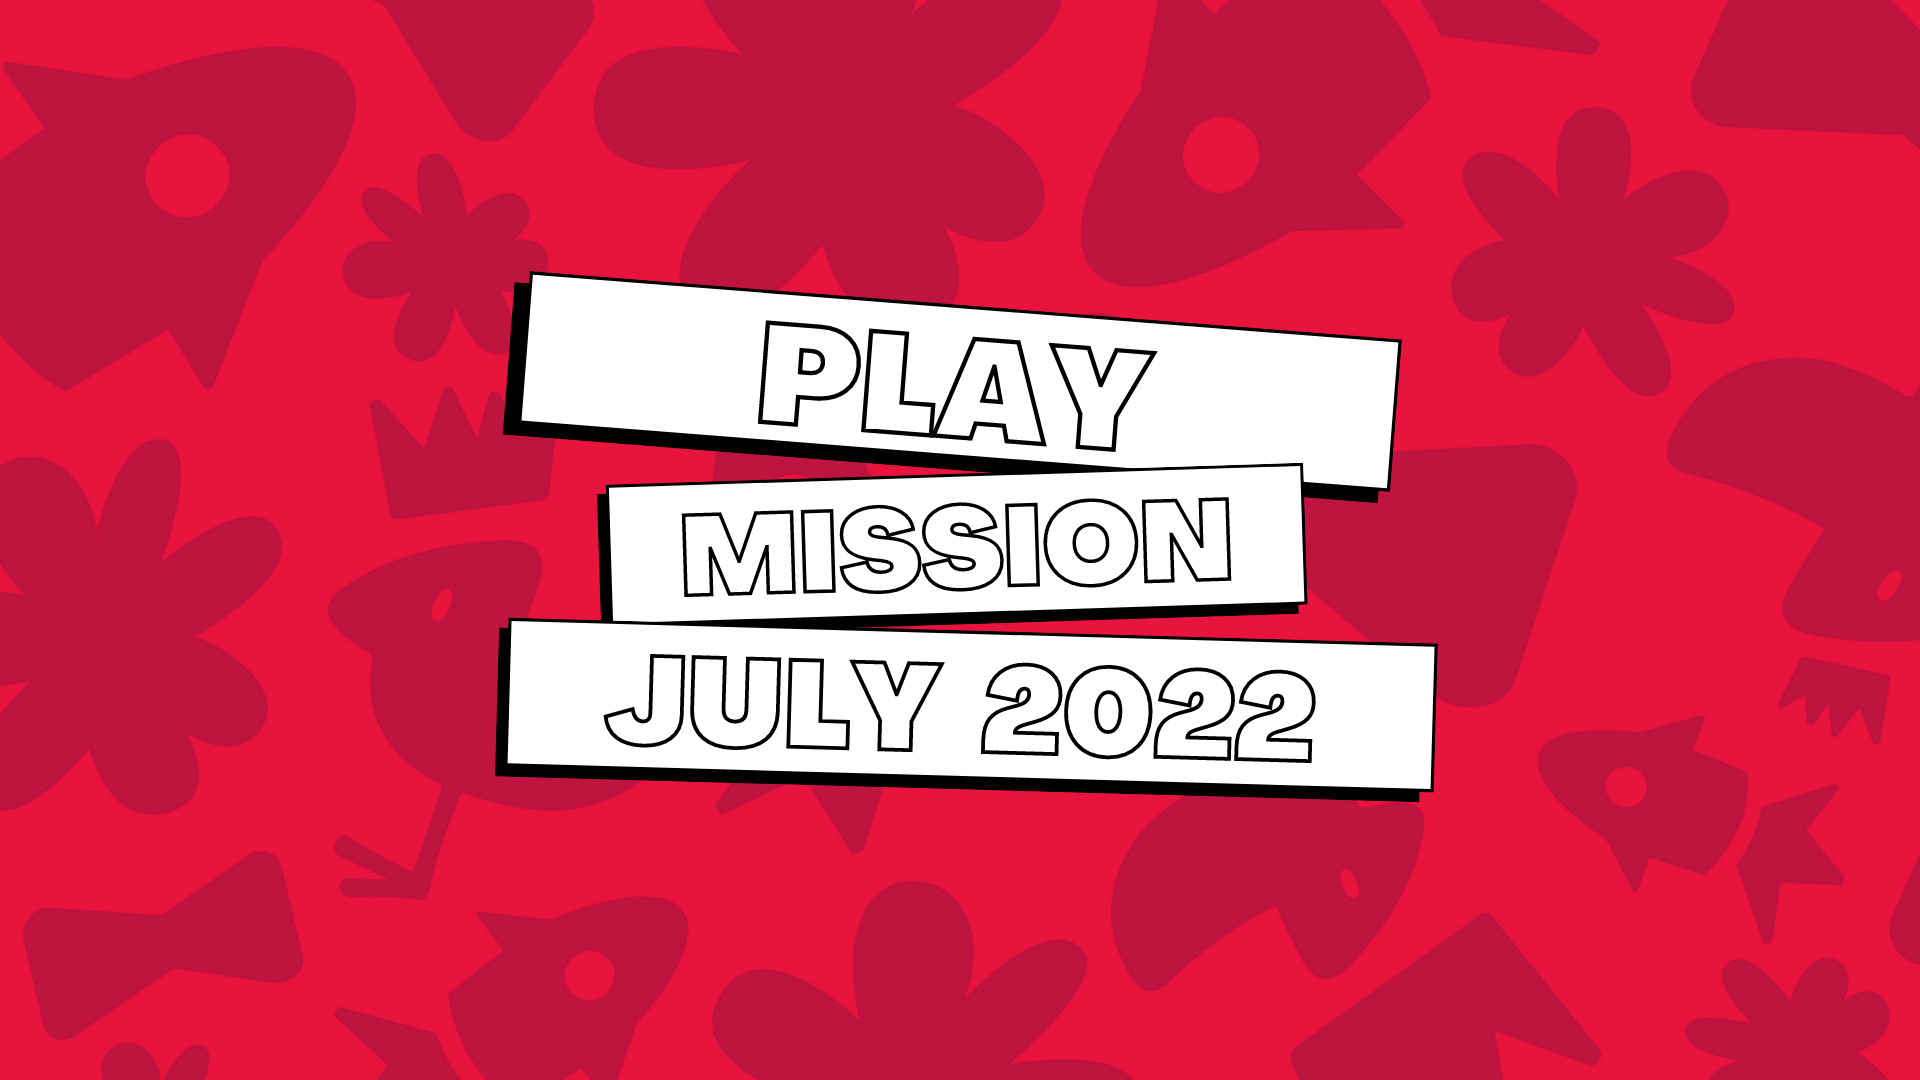 Load video: Play Mission Launch Video